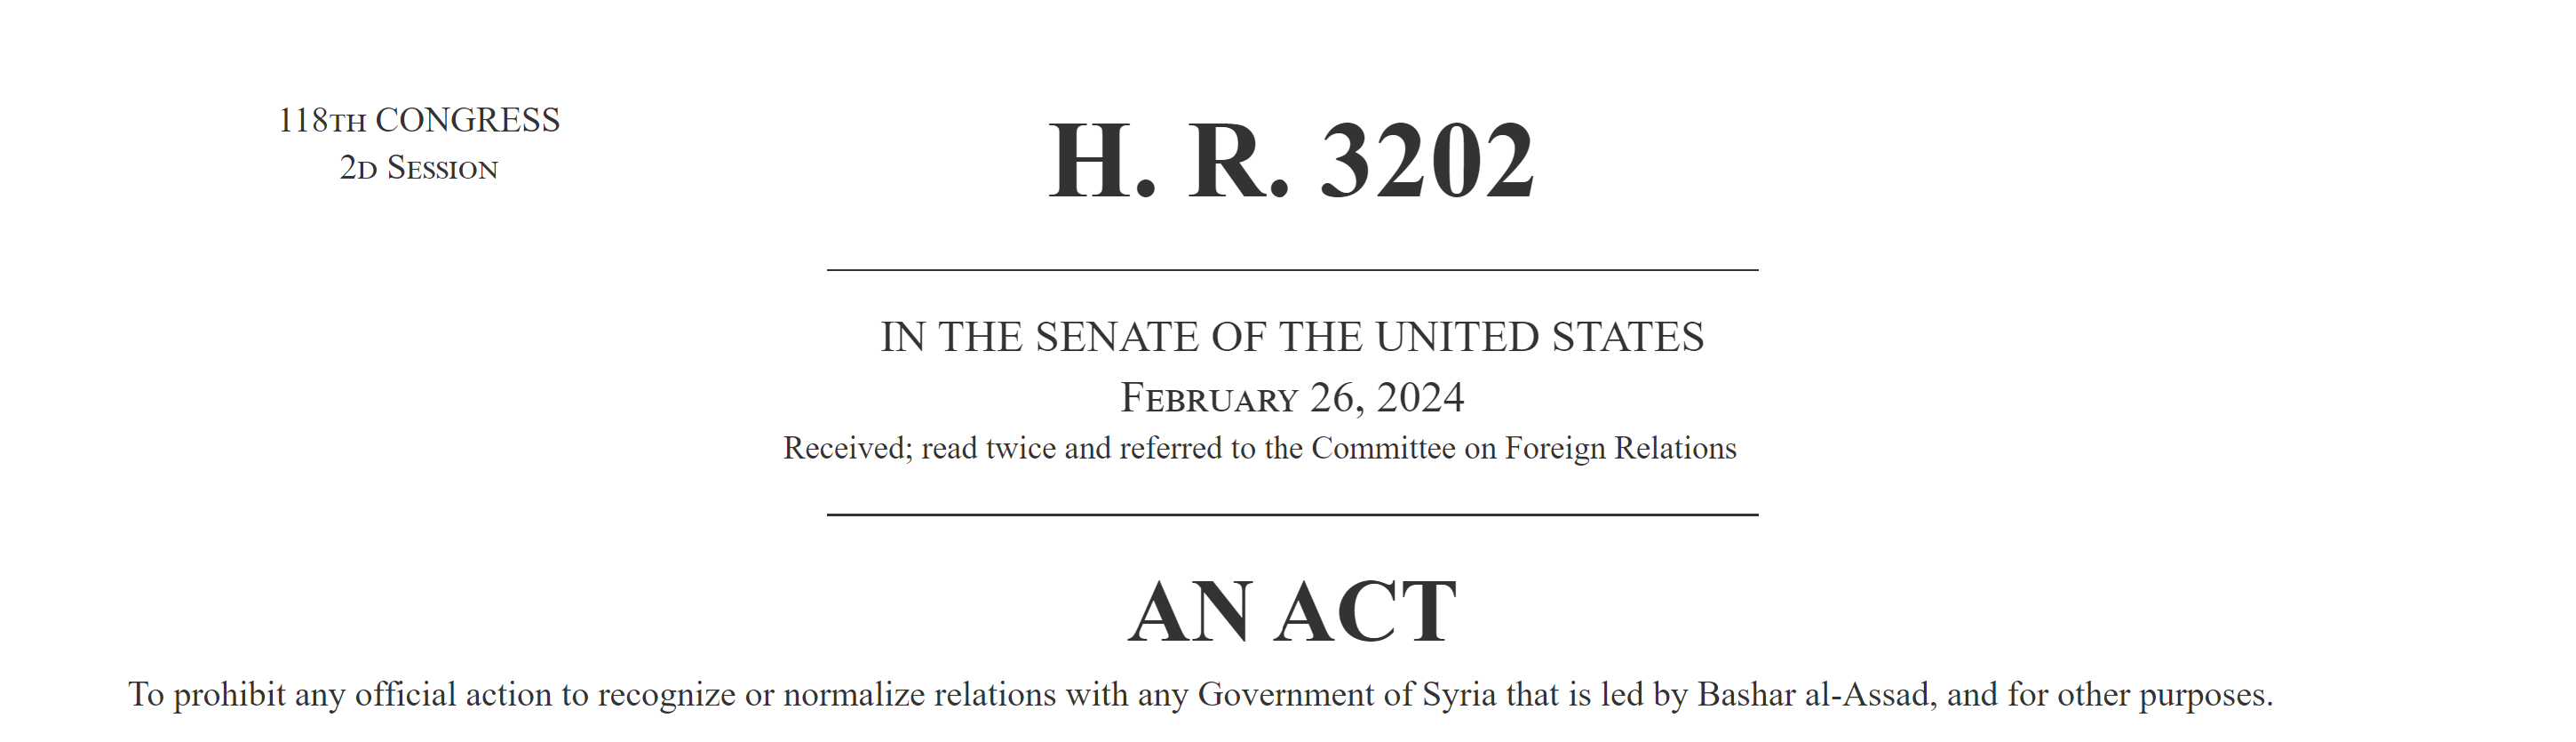 Assad Regime Anti-Normalization Act Passes the House